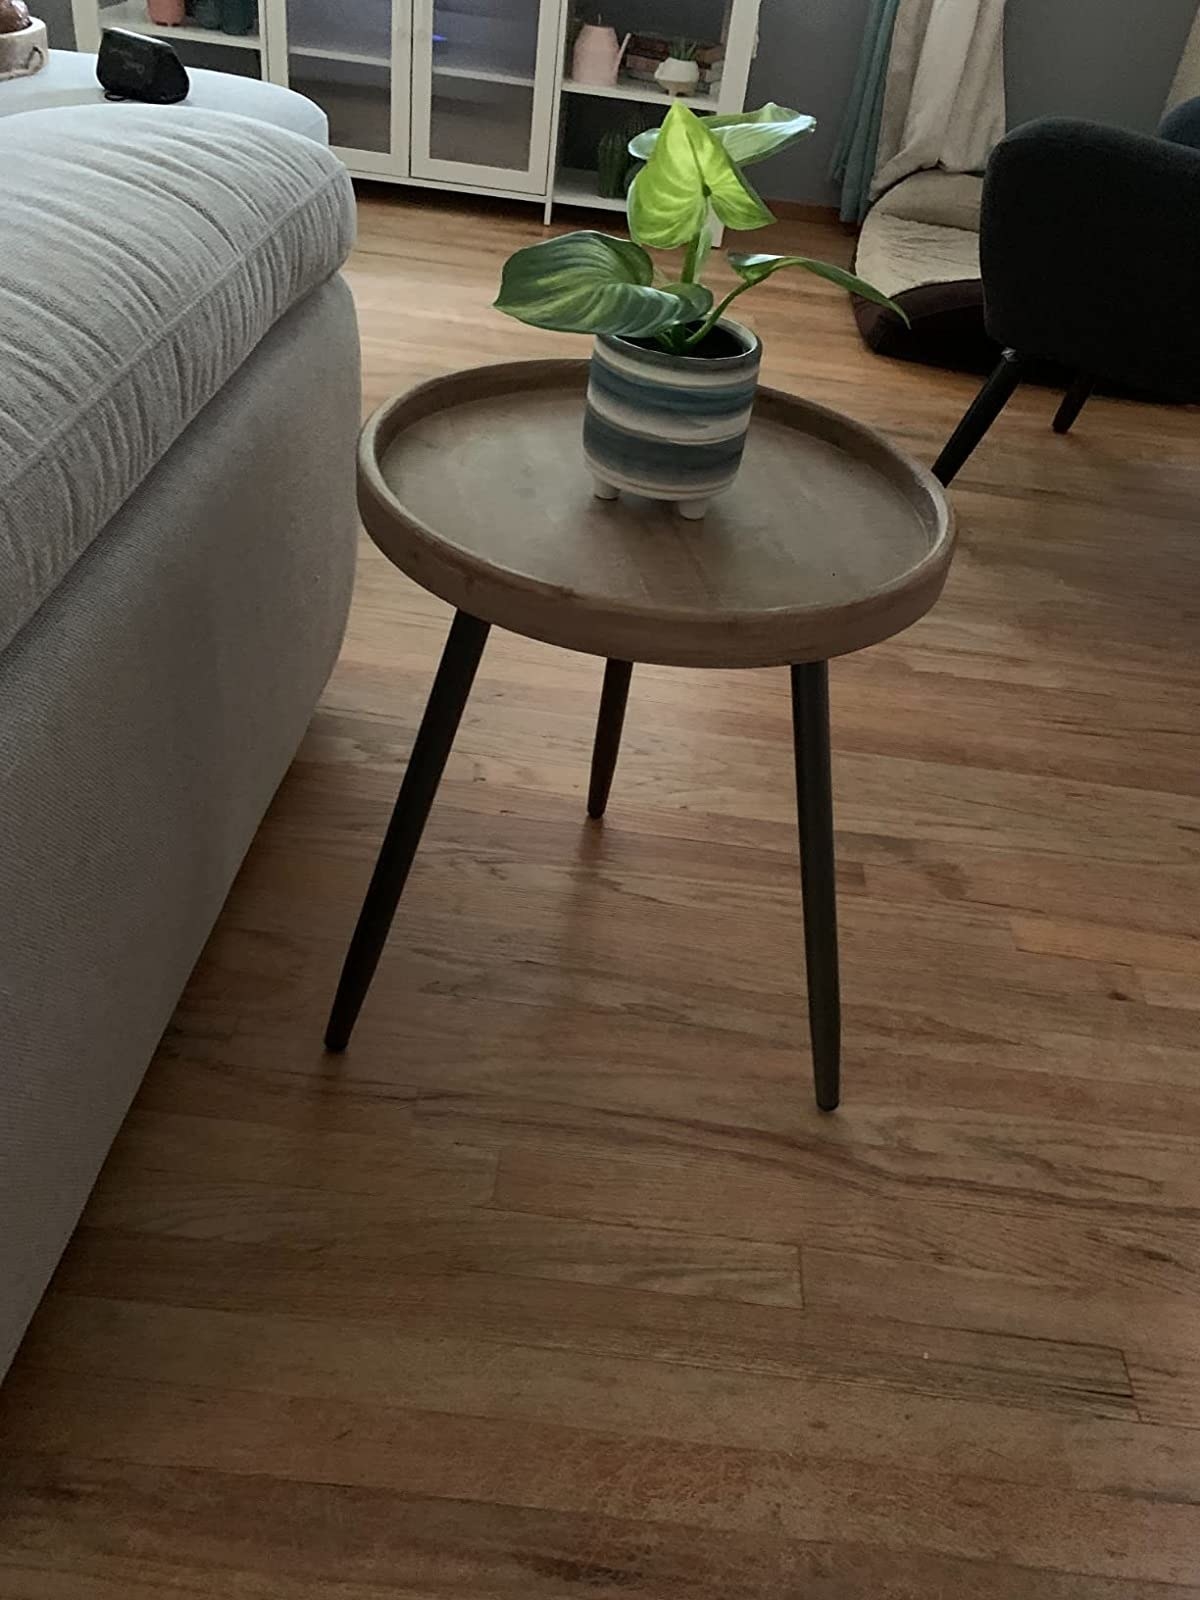 Reviewer image of the wood side table with a potted plant on it